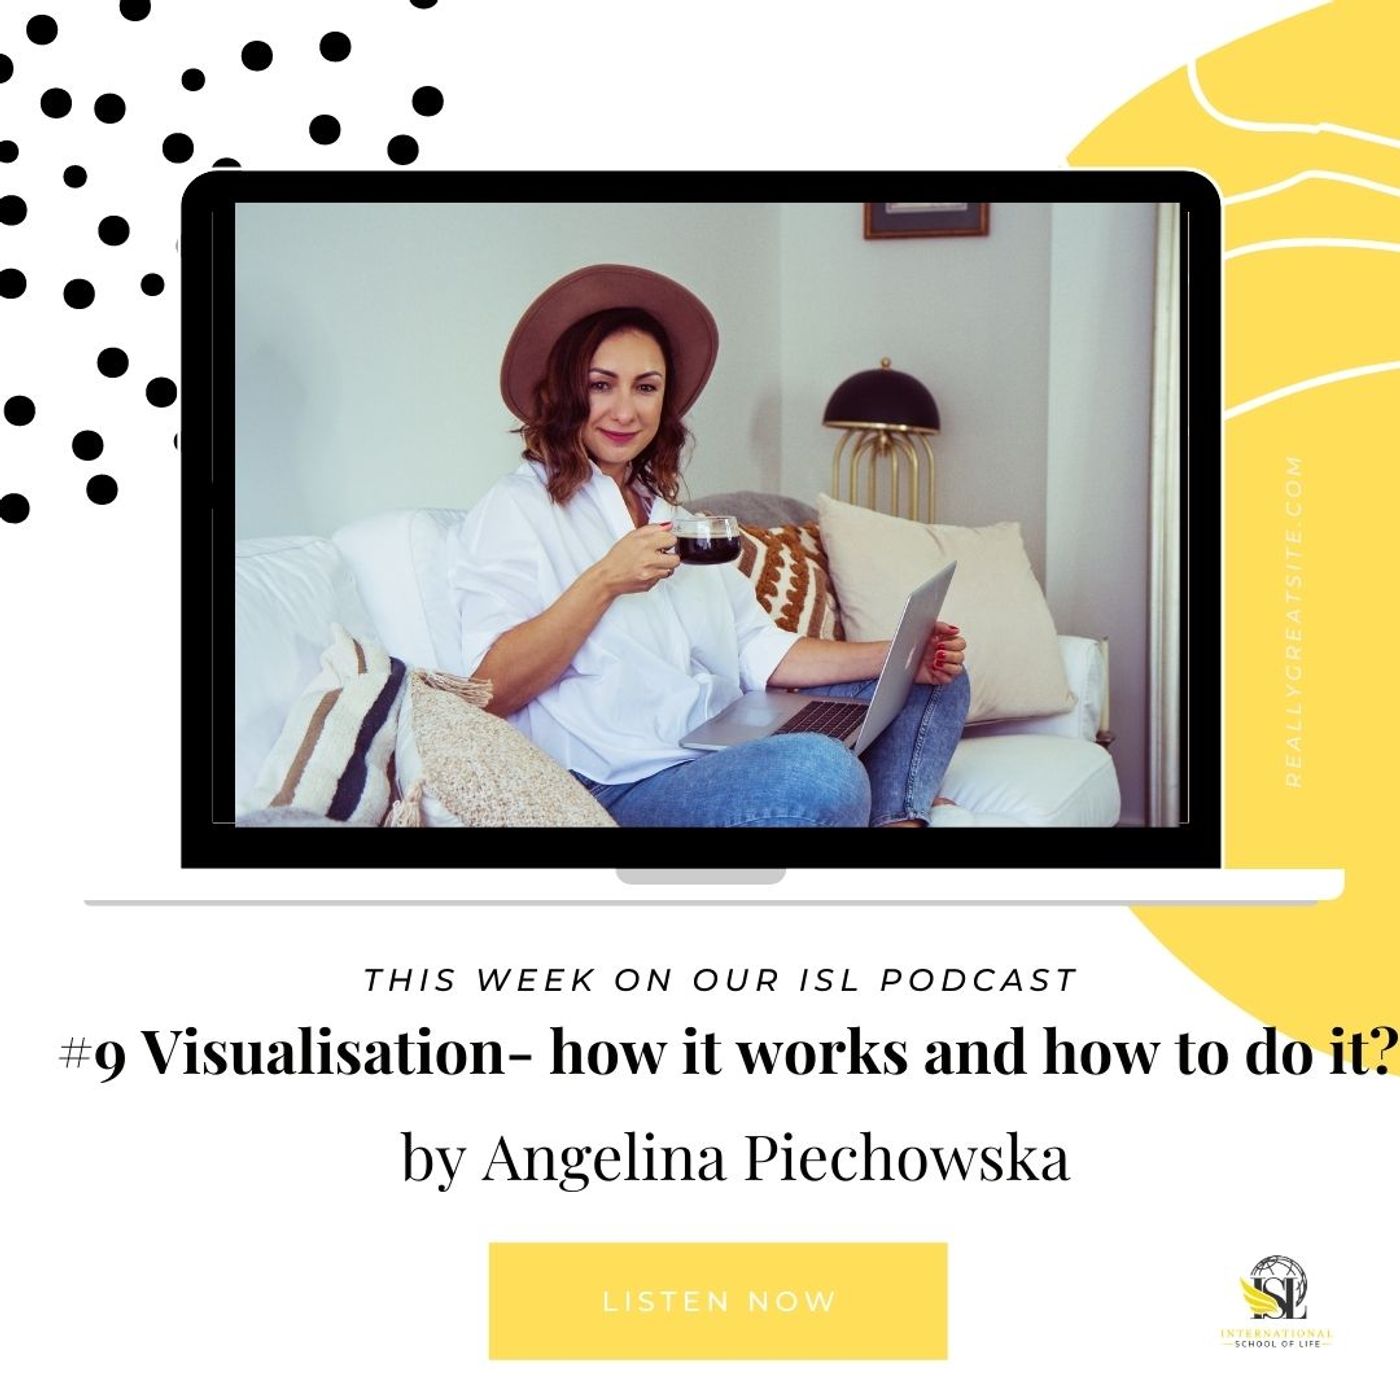 #9 Visualisation, how it works and how to do it!